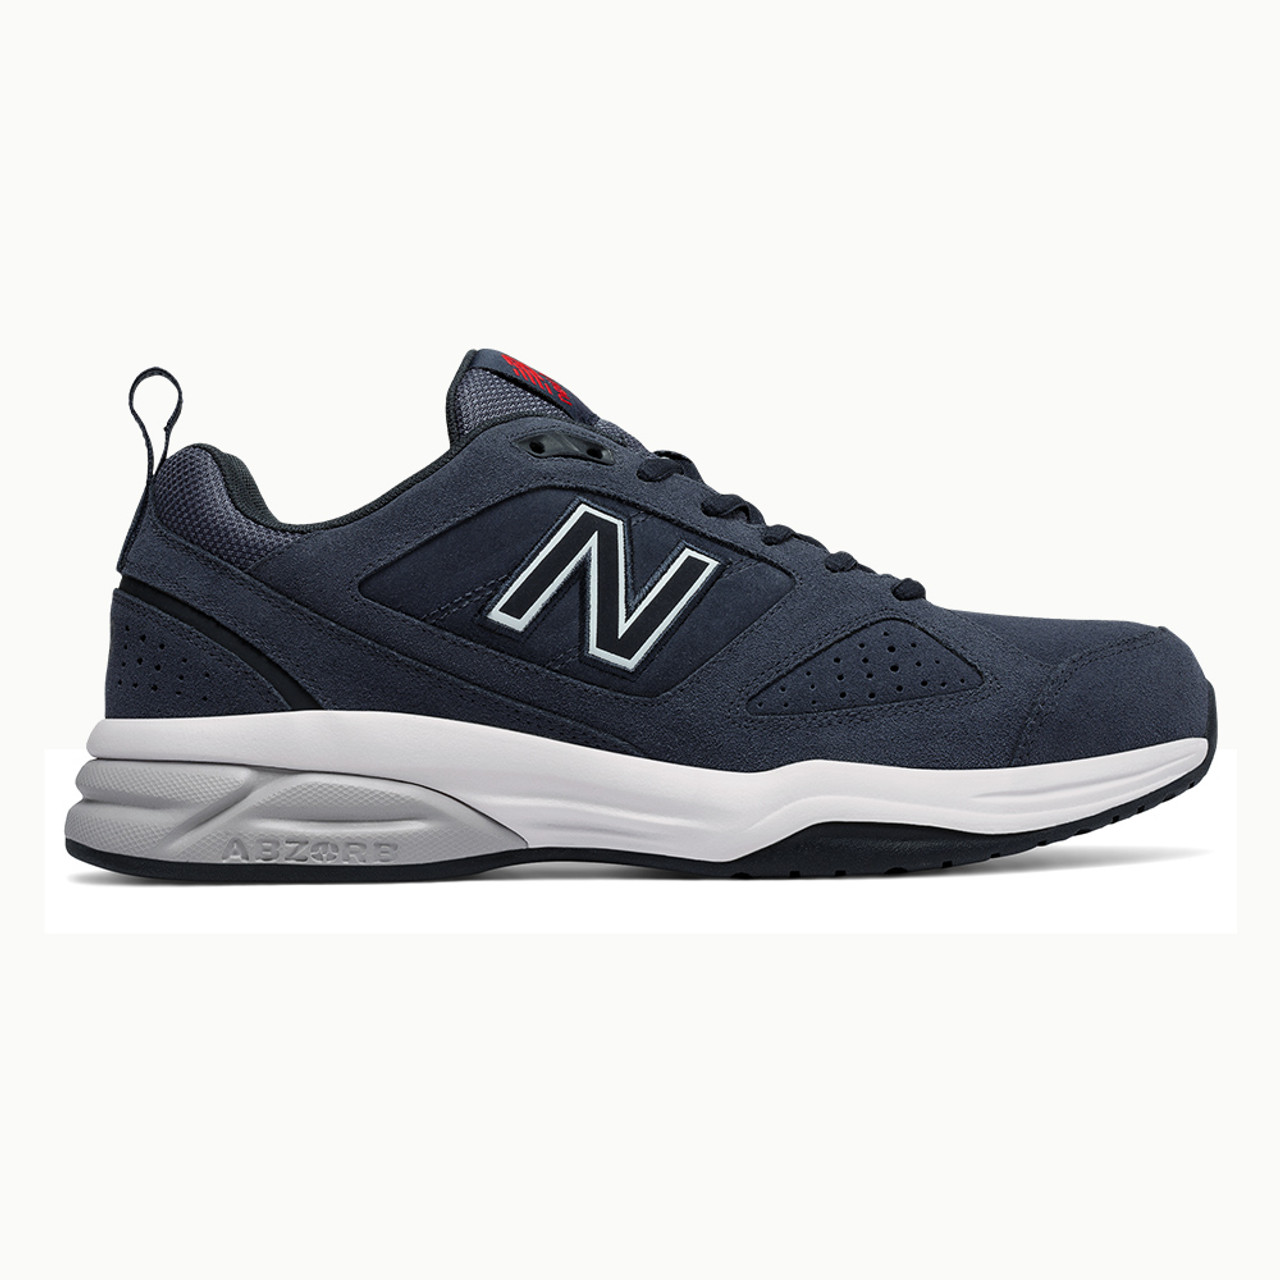 New Balance 623v3 Suede Cross Trainer 